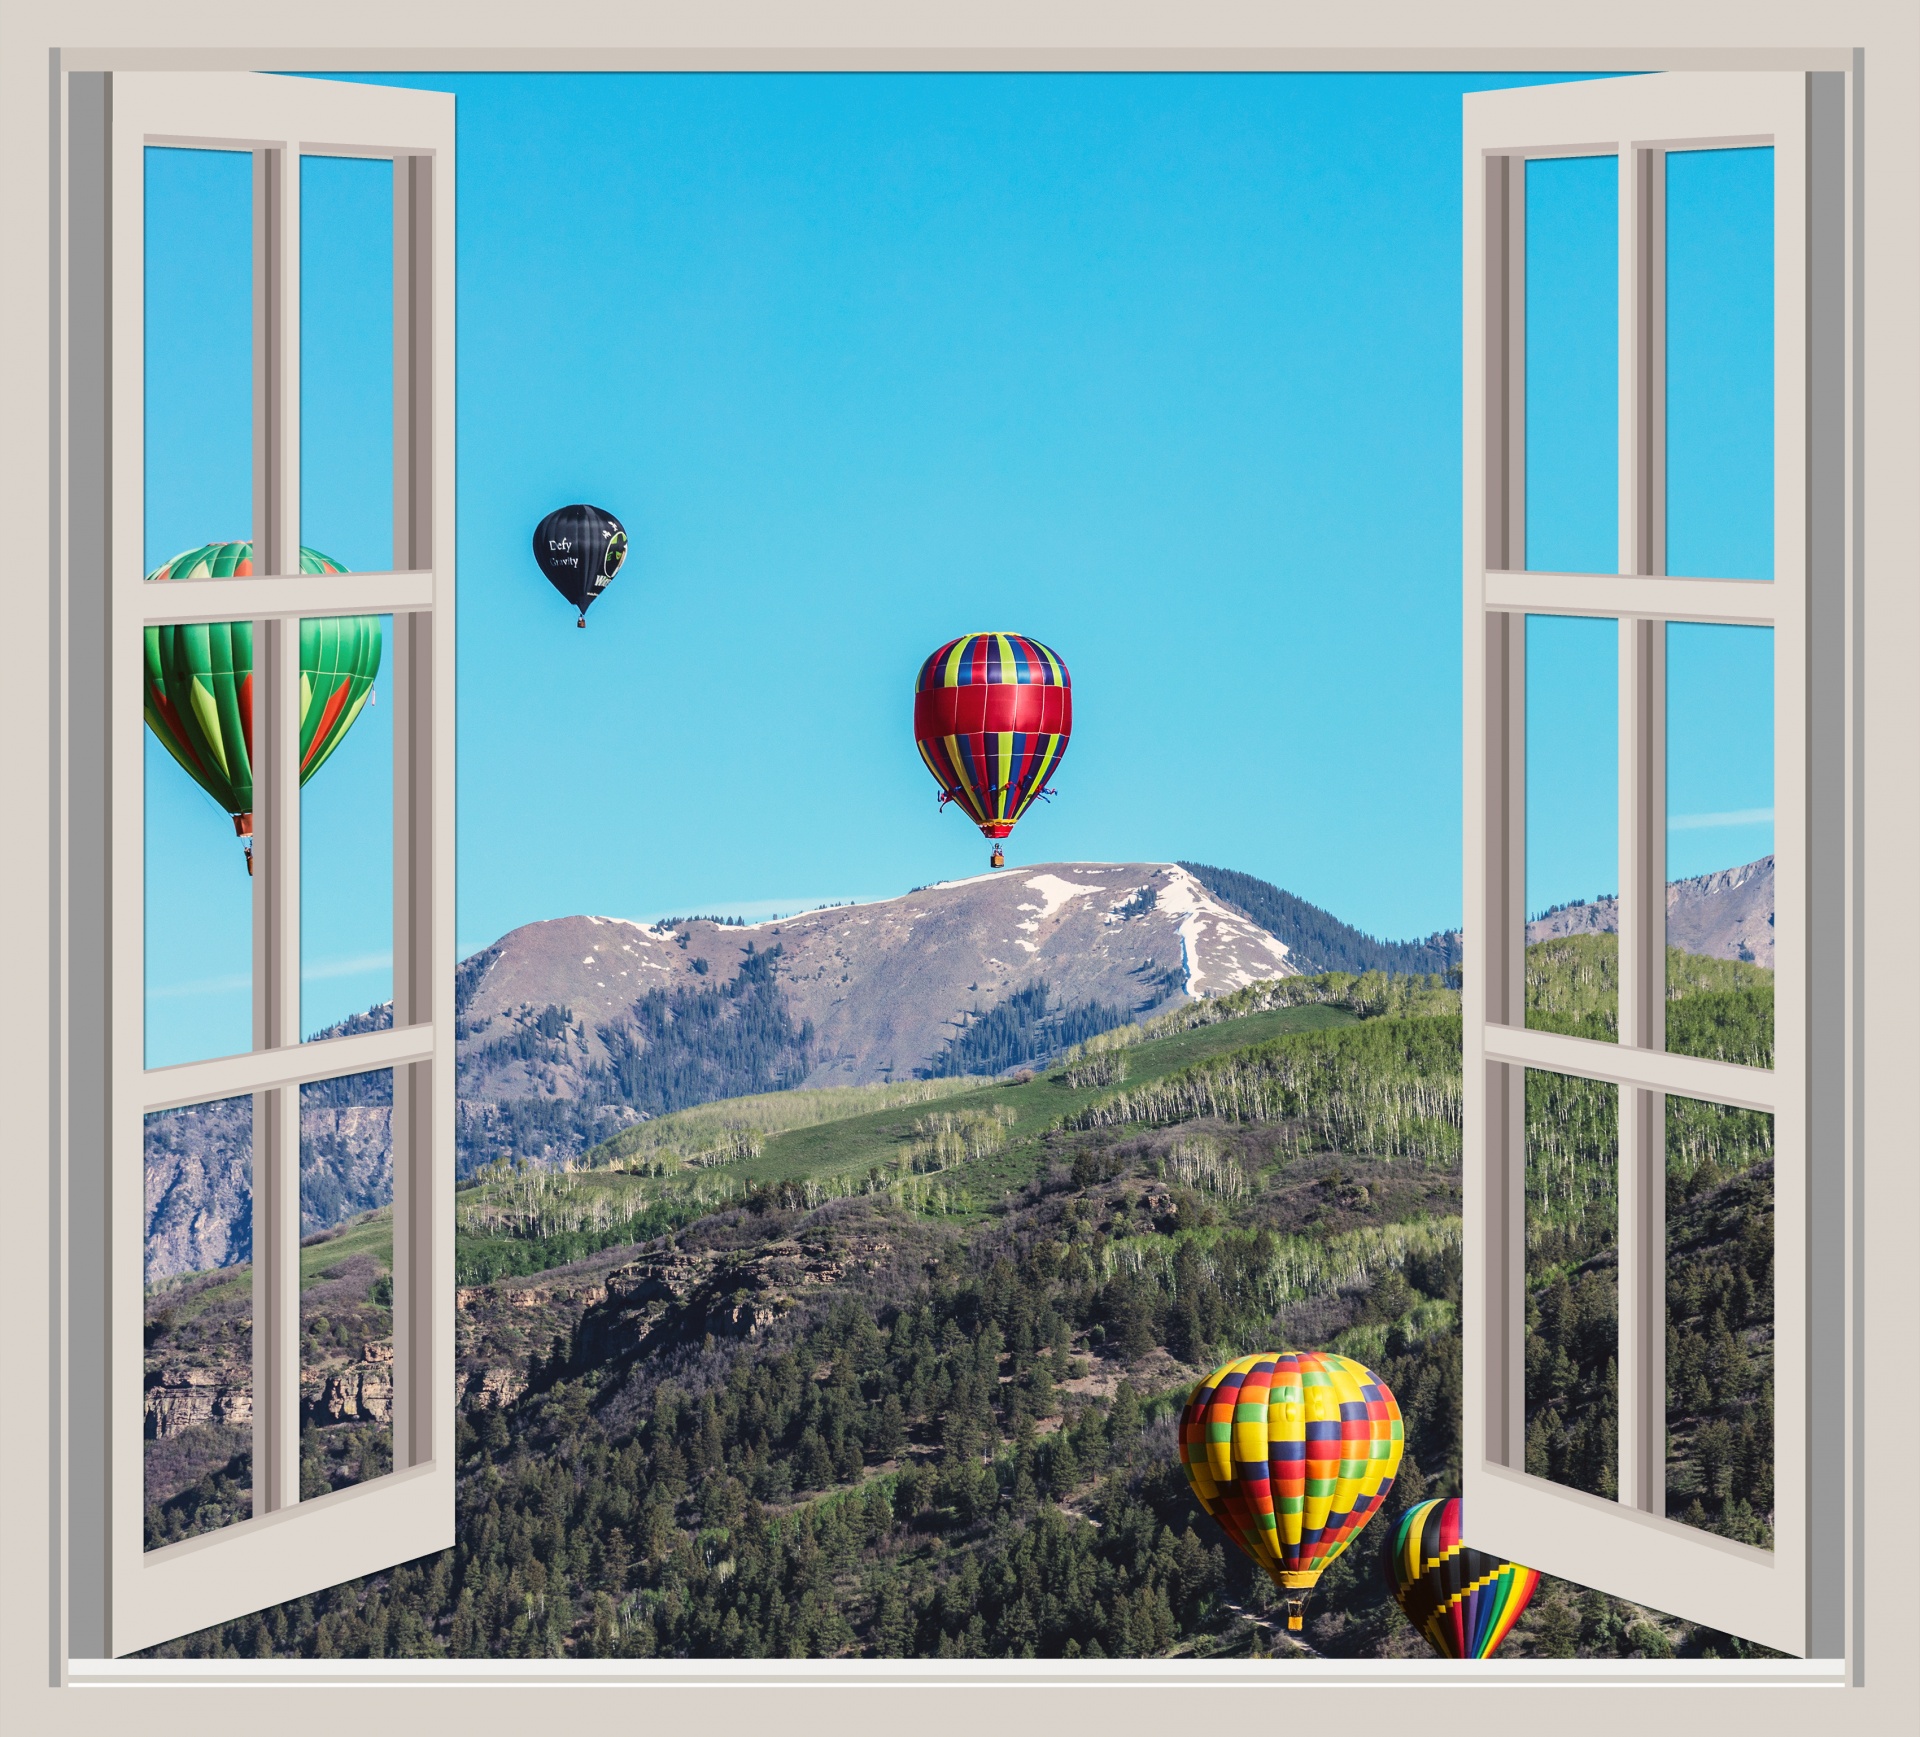 Hot air balloons with mountains backdrop view through open window